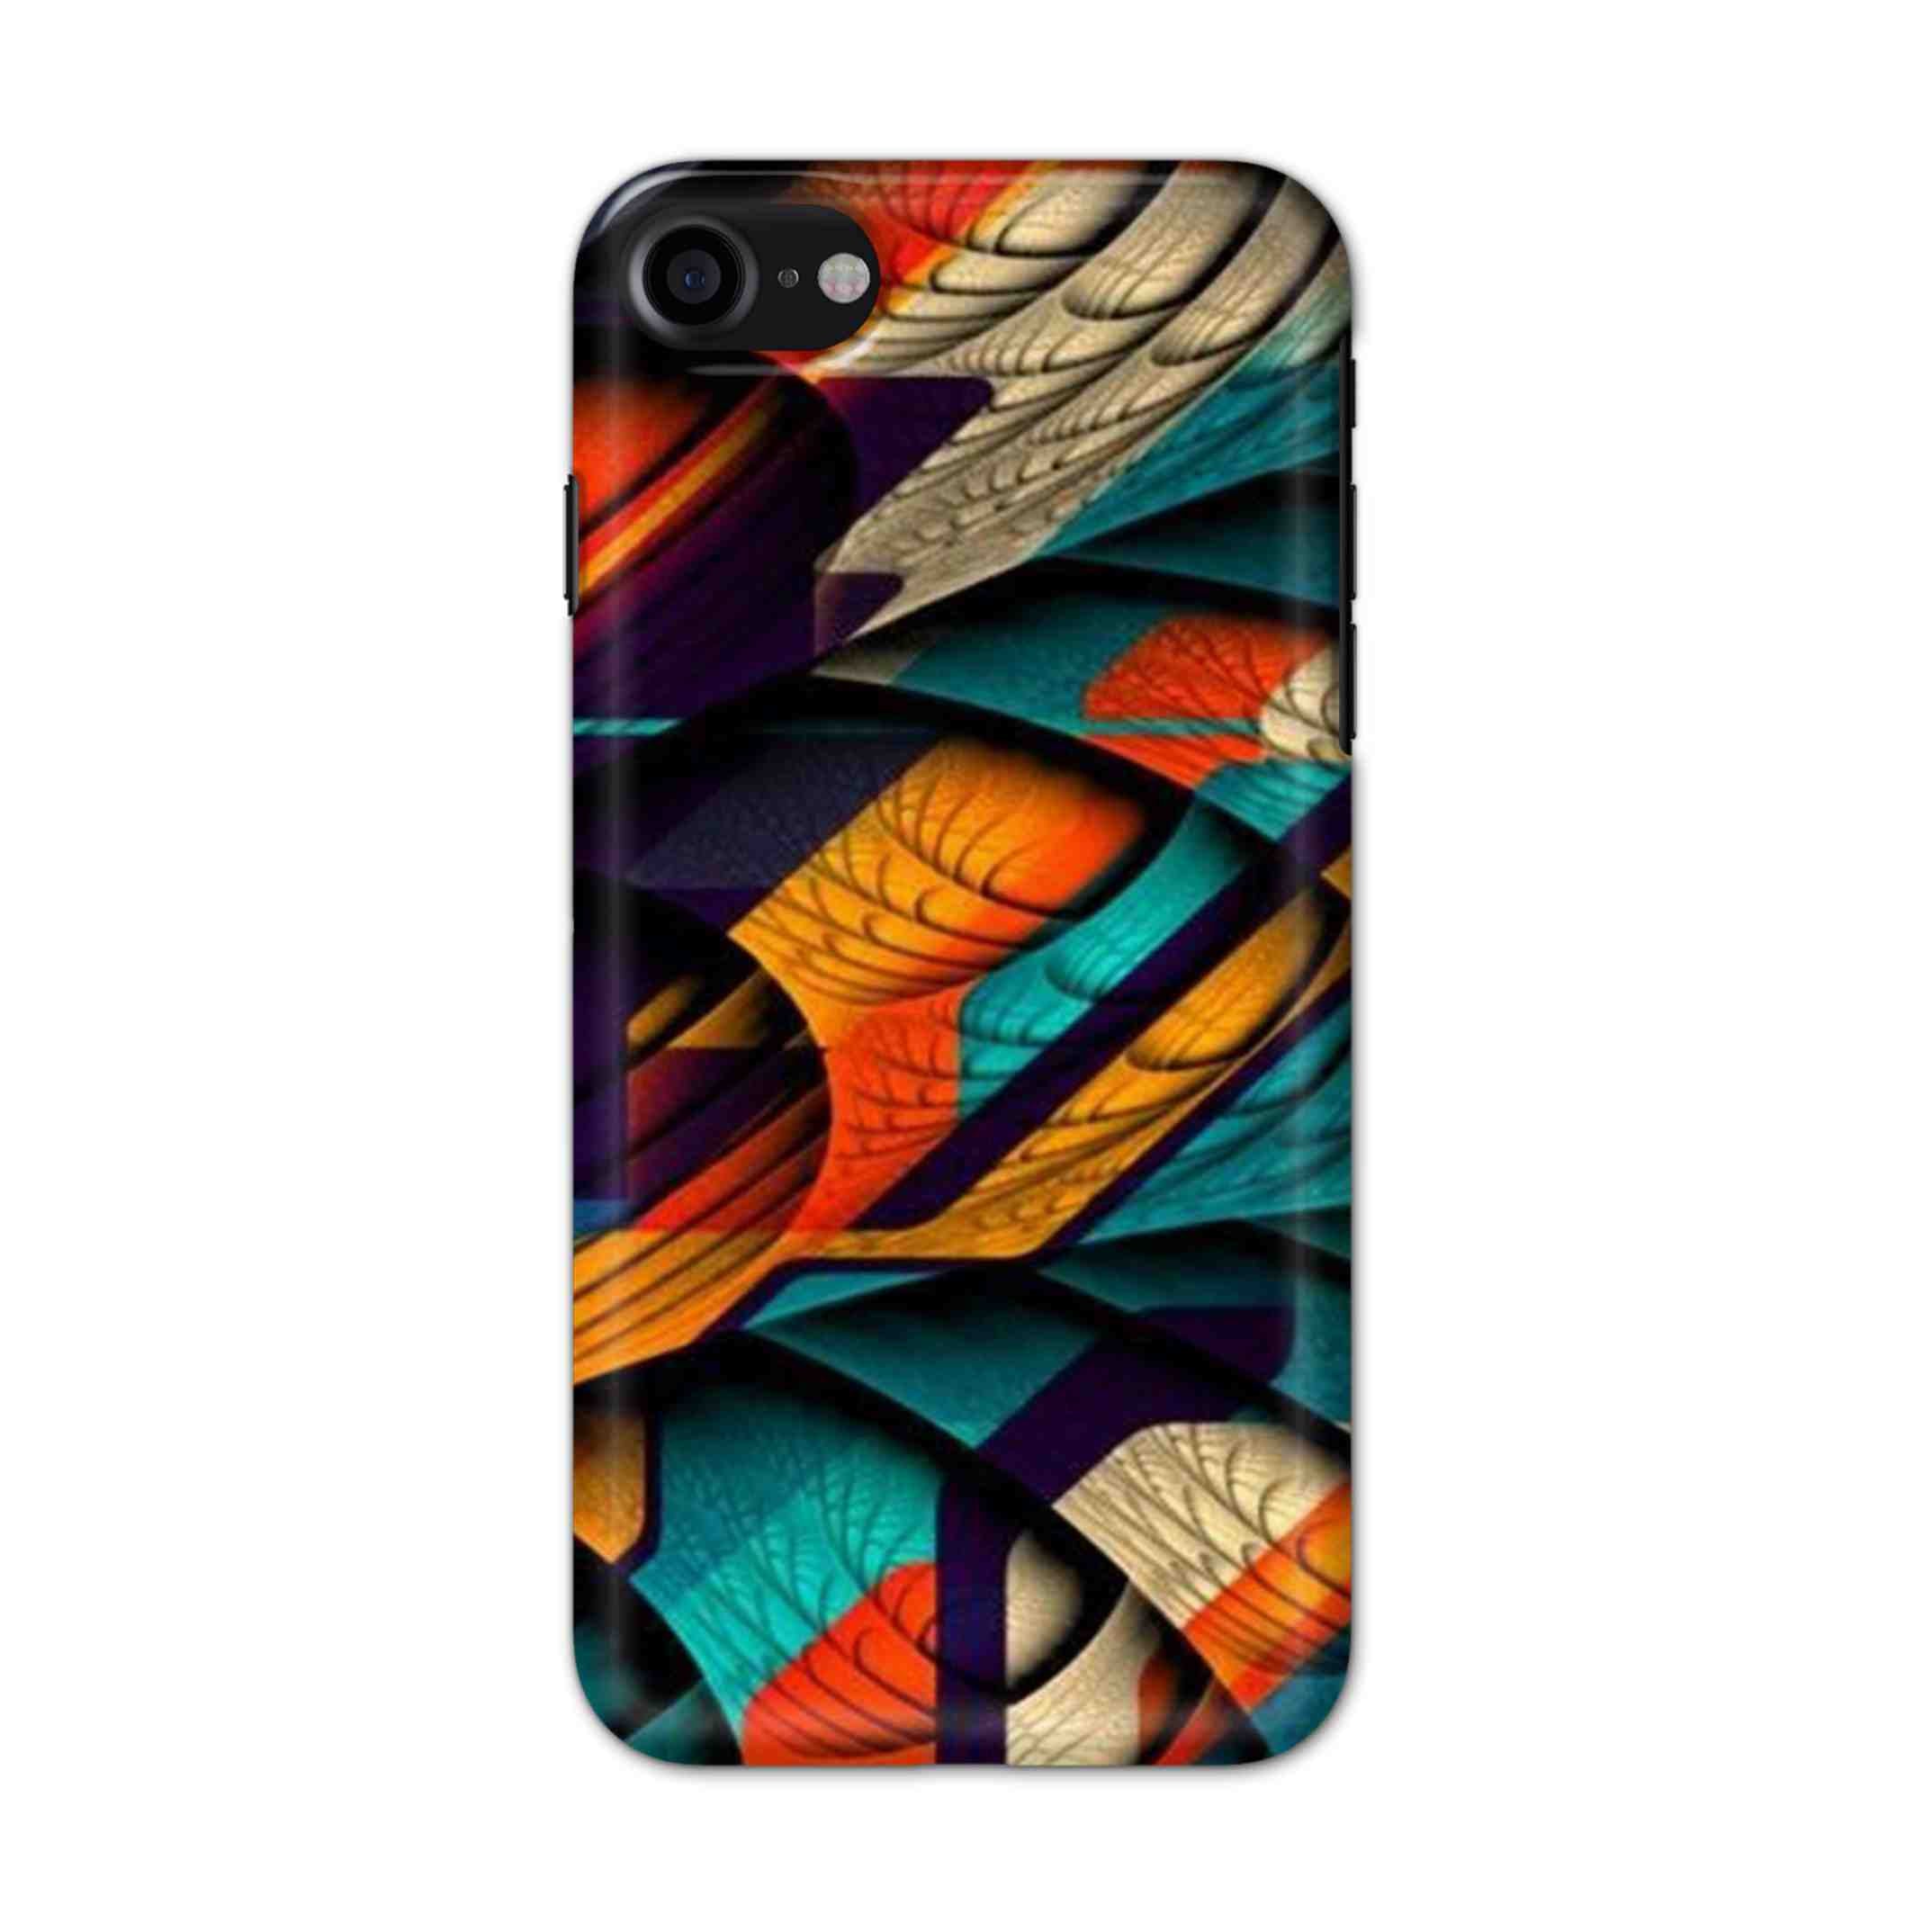 Buy Color Abstract Hard Back Mobile Phone Case/Cover For iPhone 7 / 8 Online